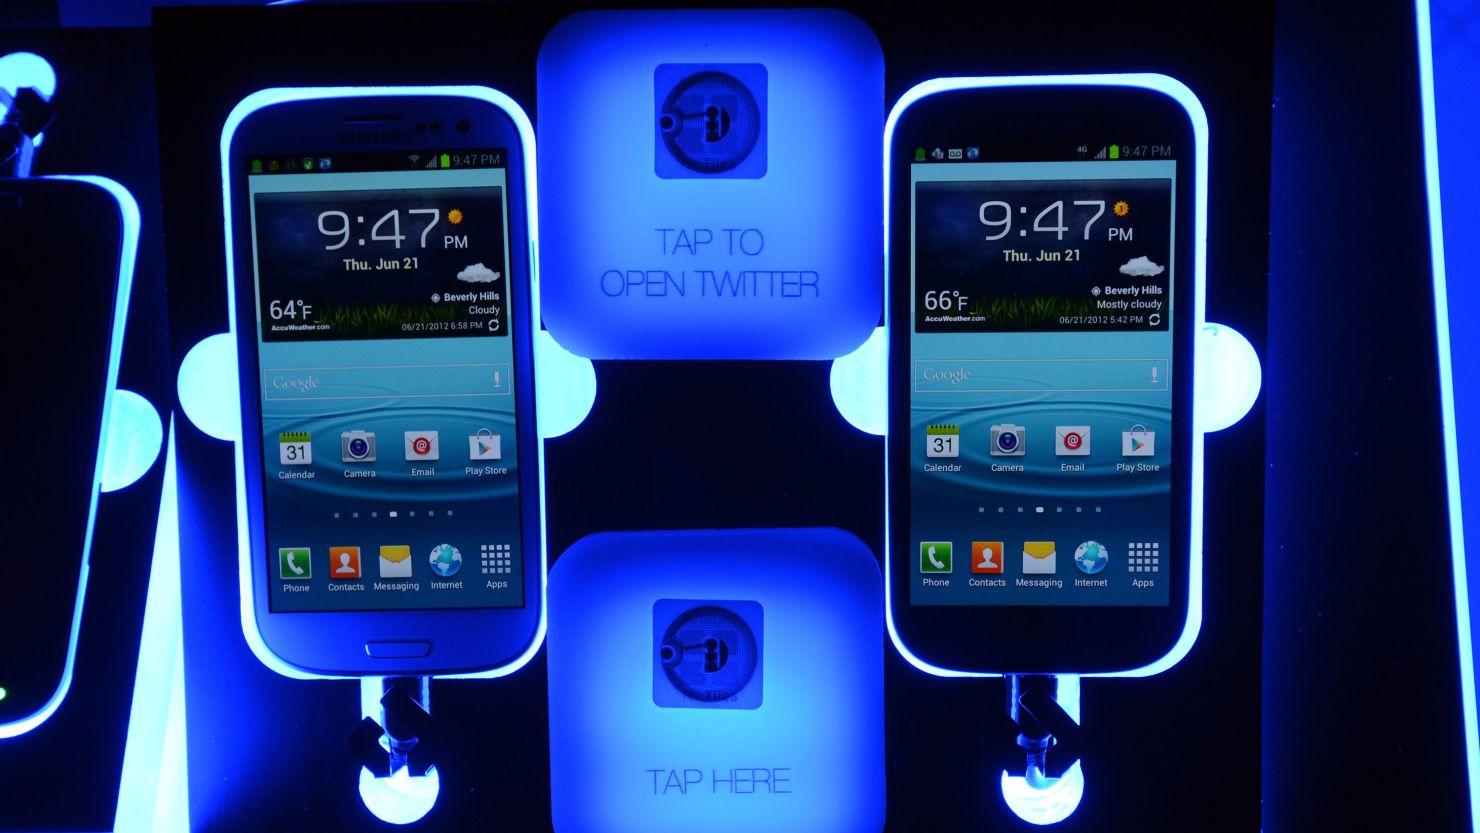 South Korean tech giant Samsung has high hopes for its latest smartphone device -- the Galaxy S III.